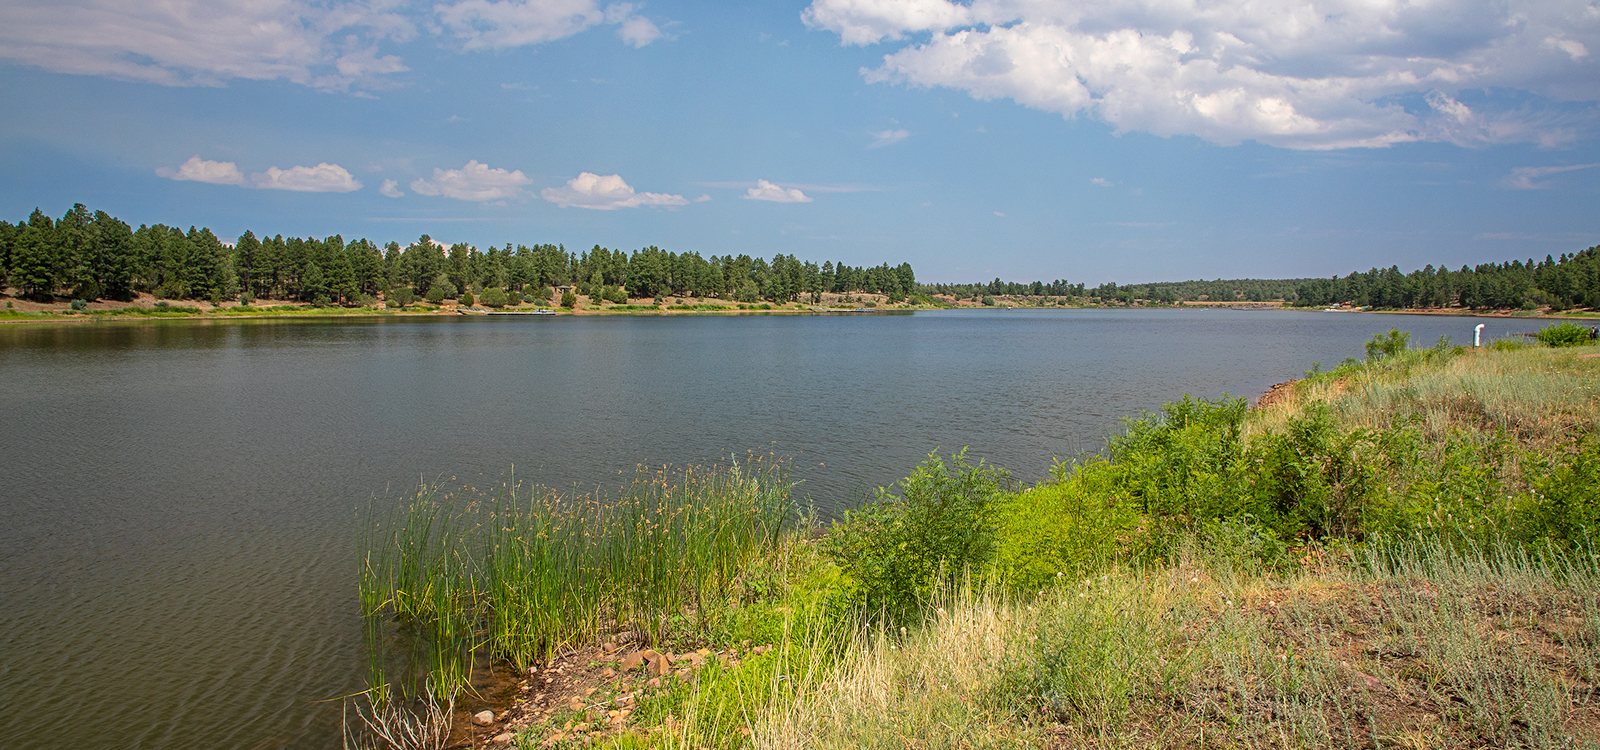 The lake stretching into the distance at Fool Hollow Lake Recreation Area